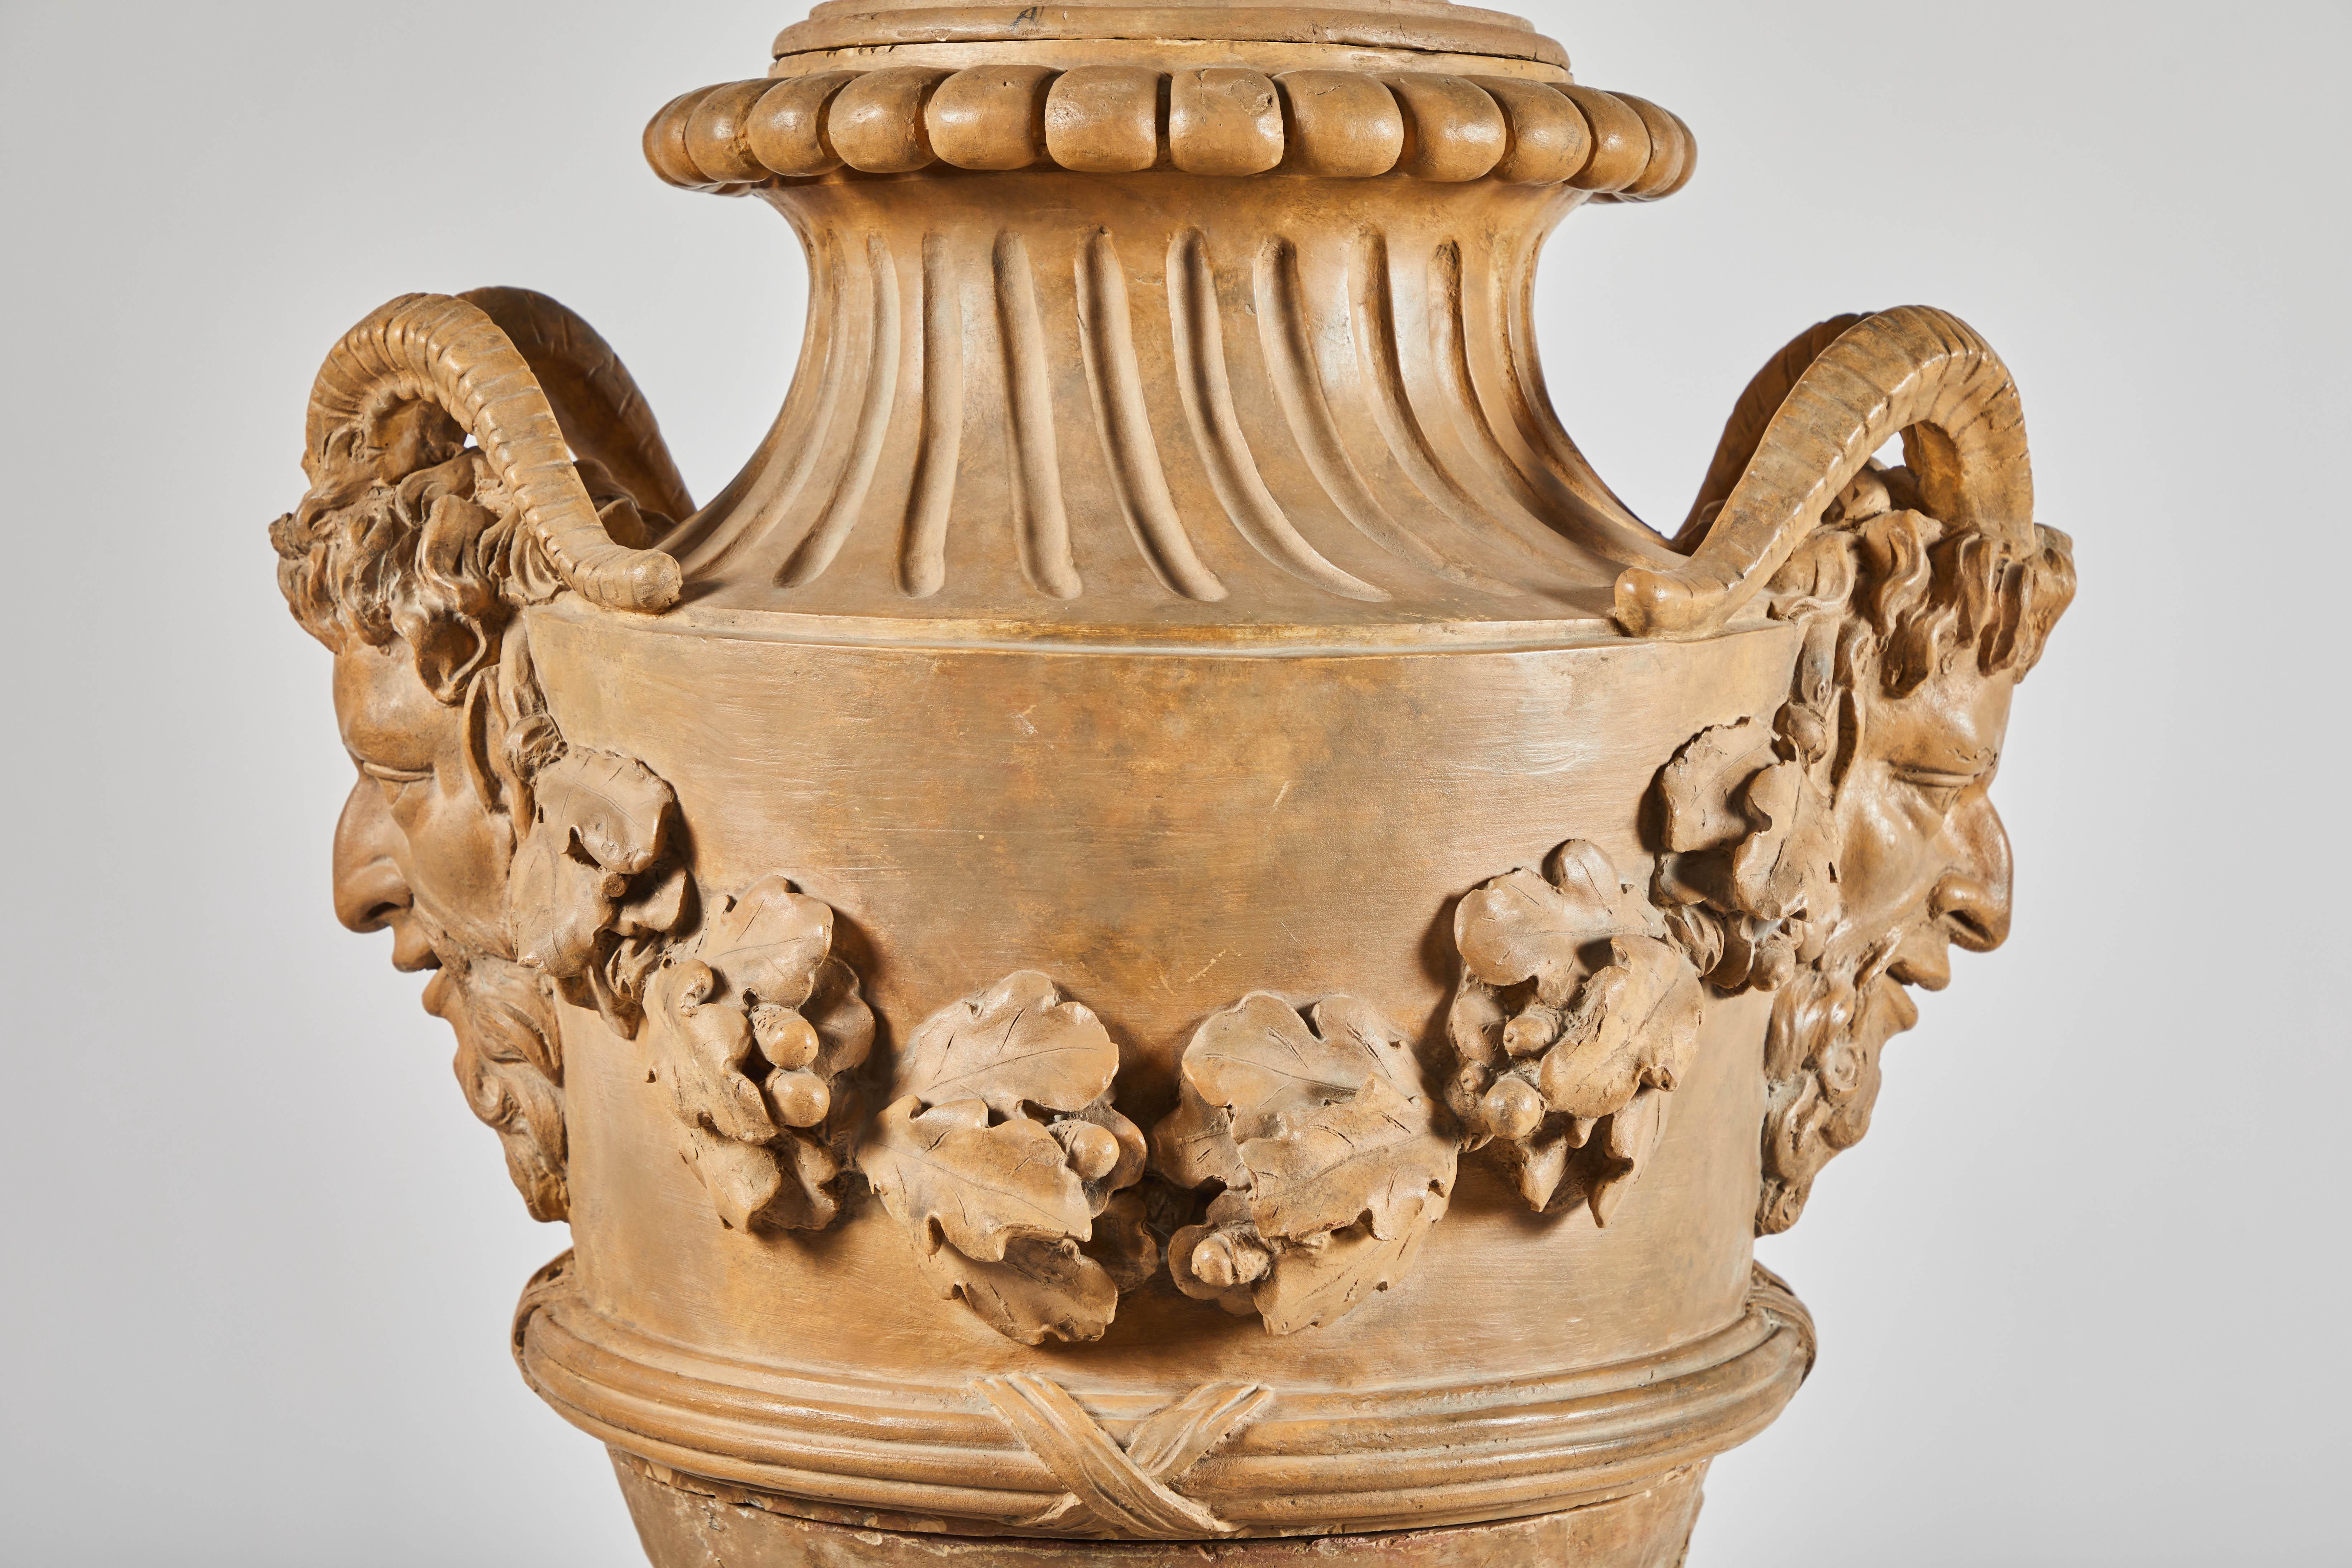 18th Century and Earlier 18th Century Terracotta Urns on Pedestals from the Collection of Karl Lagerfeld For Sale